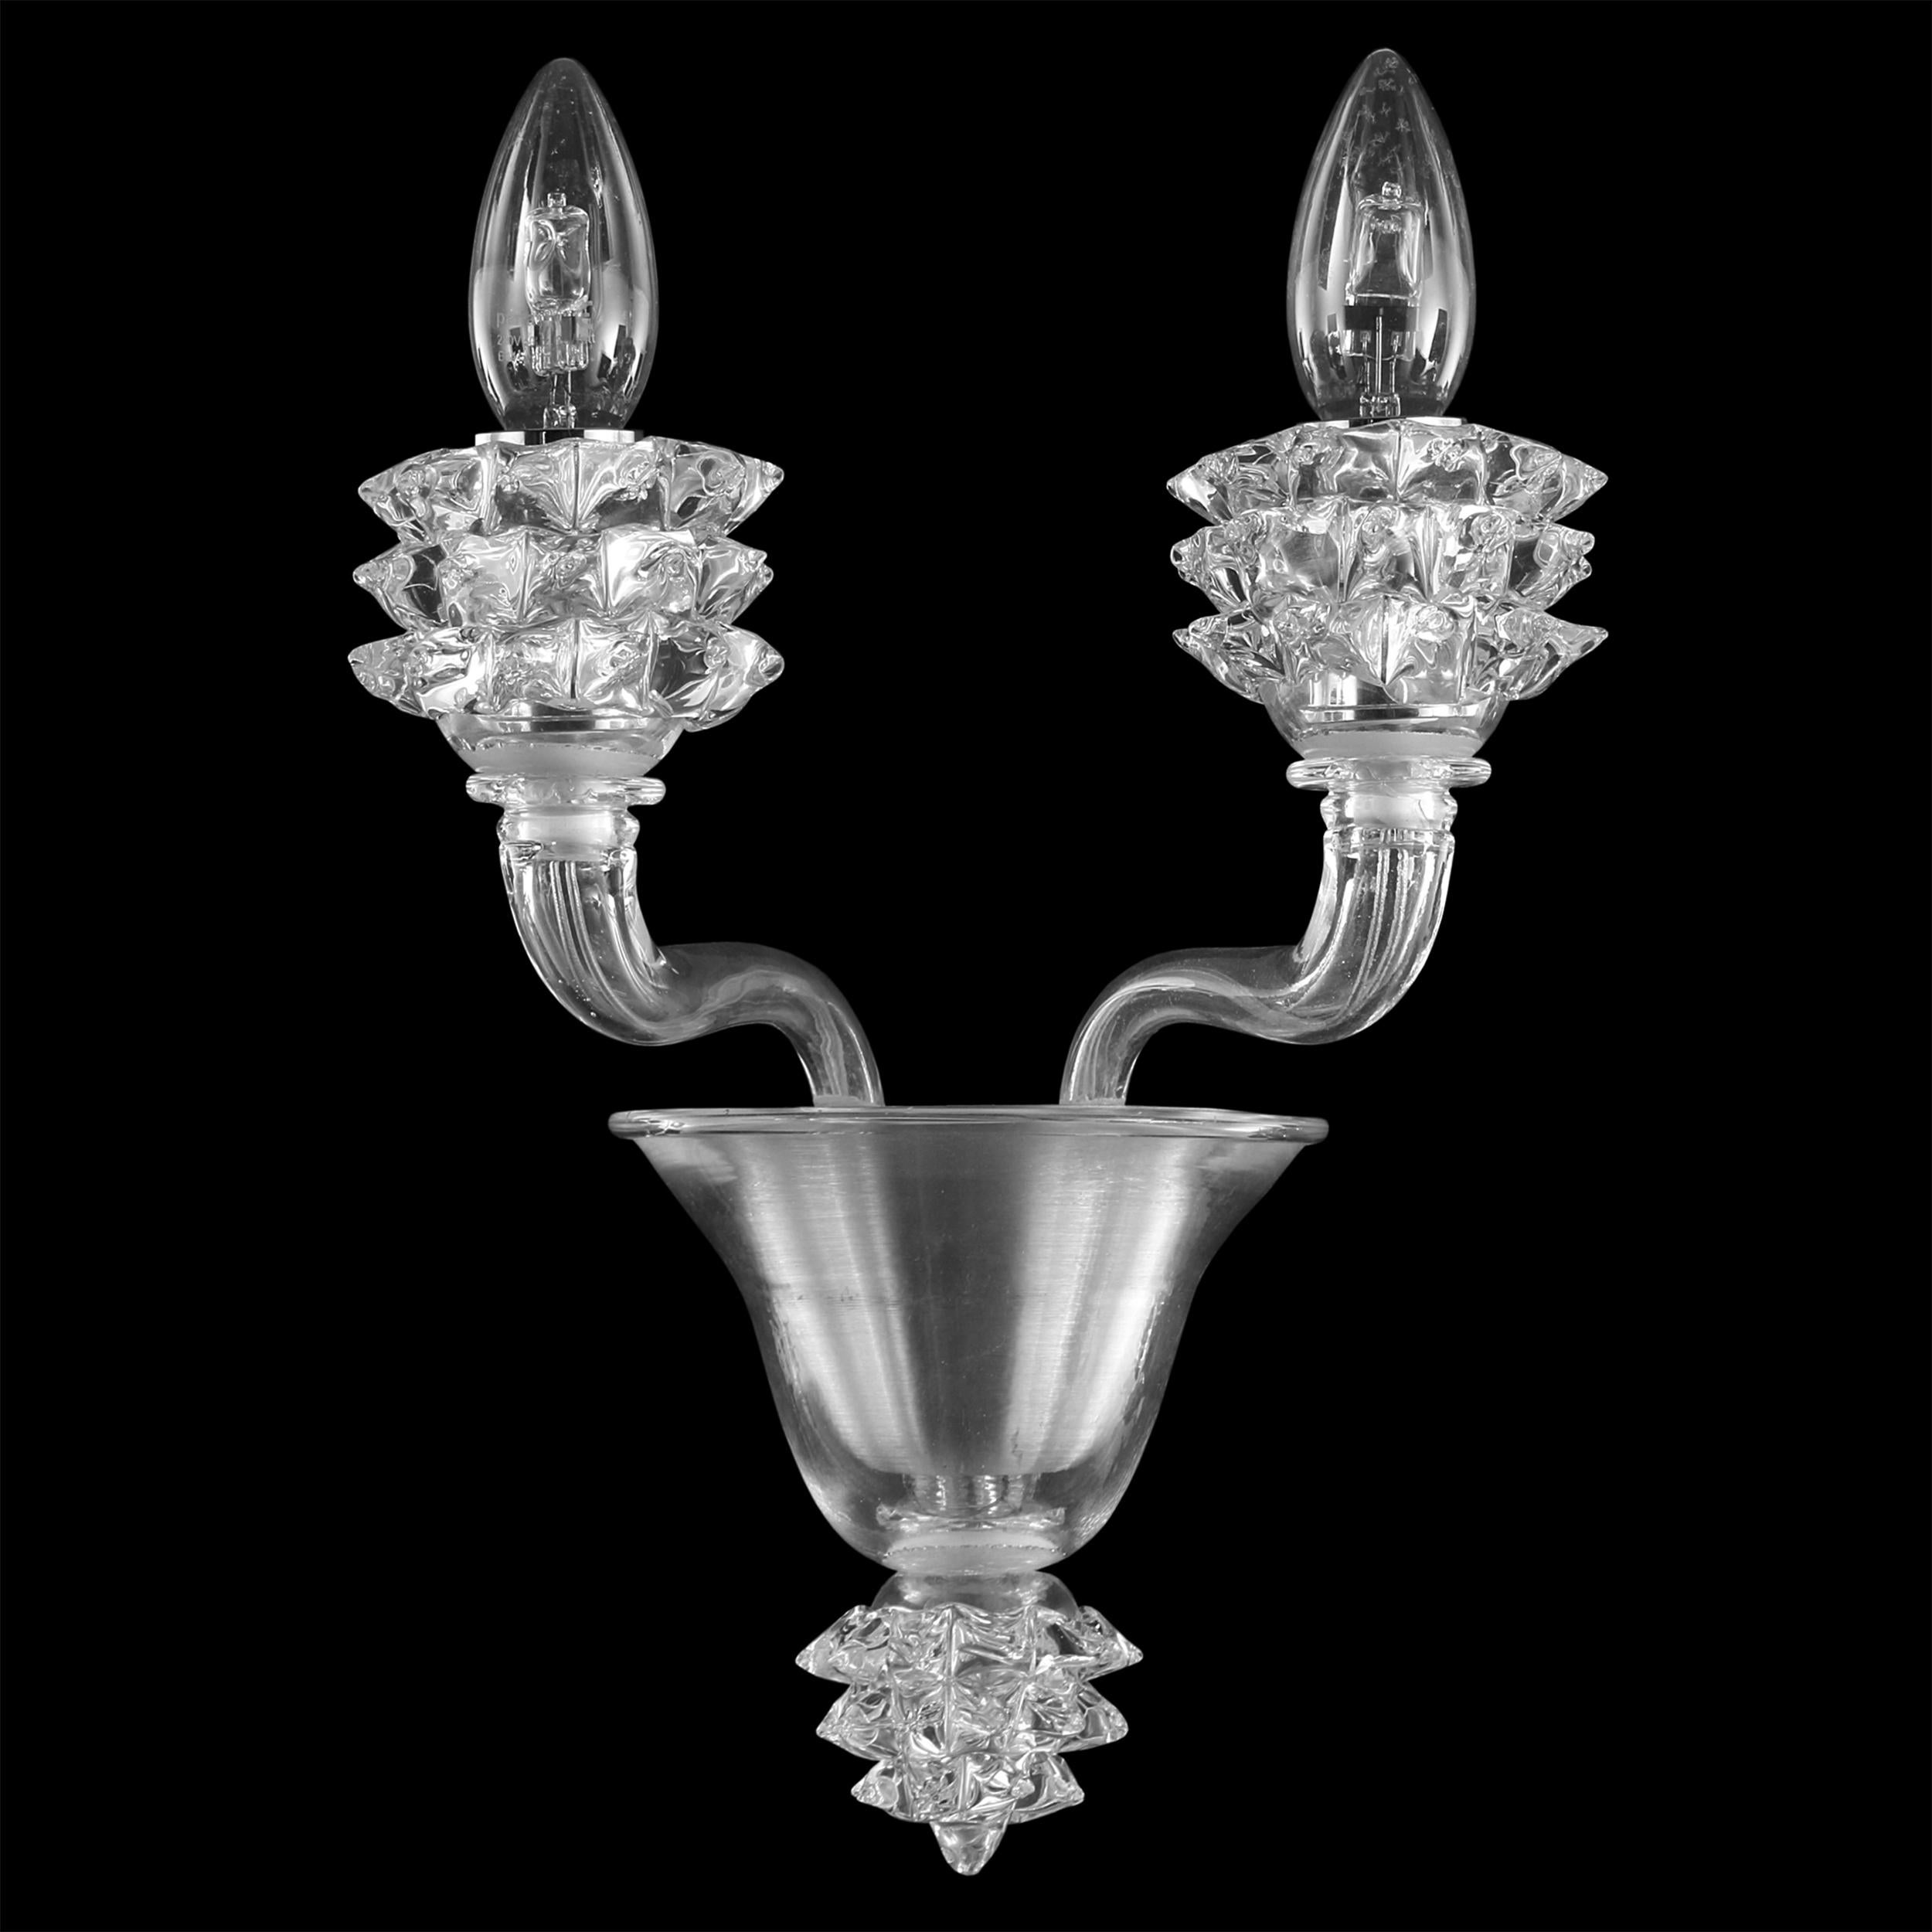 The Diamante sconce with 2 arms in clear encased Murano glass and clear details is a well proportioned product.
The glass of the arms is smooth. The standout elements of this sconce are the cups, which are created using a complex manufacturing